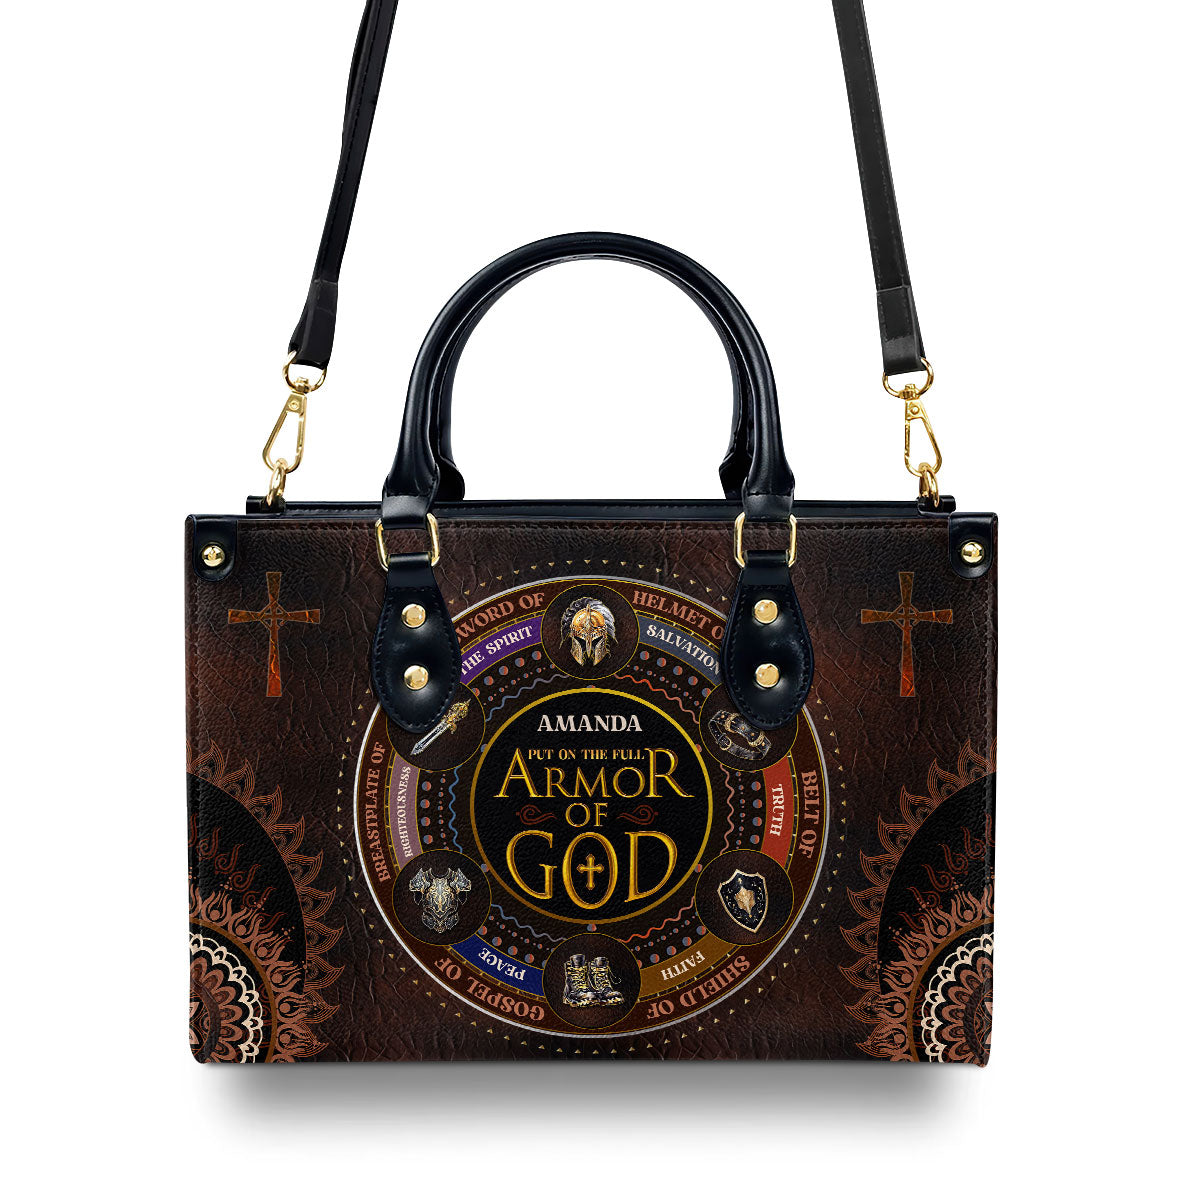 Religious Armor Of God Personalized Leather Handbag With Handle